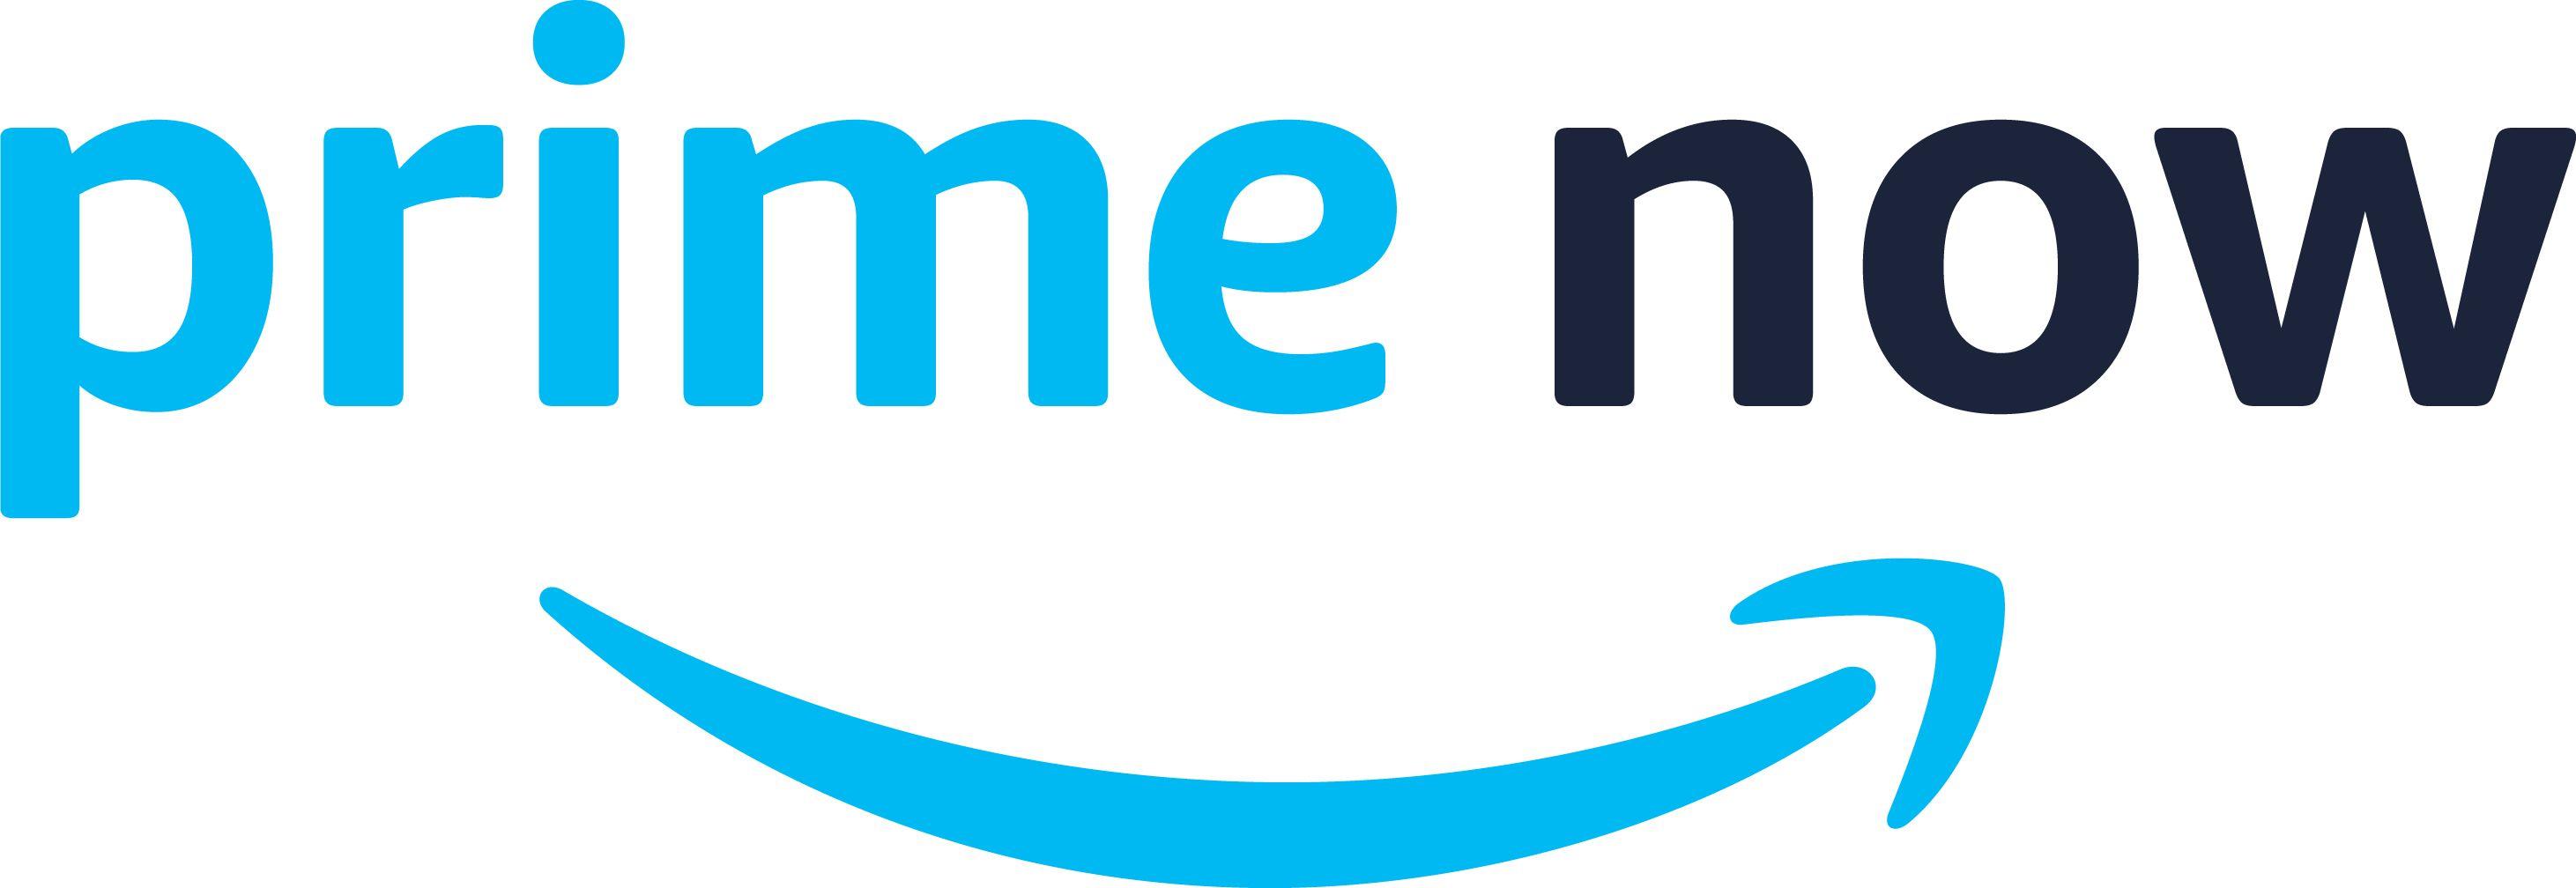 Now Logo - Images and videos | Amazon.com, Inc. - Press Room